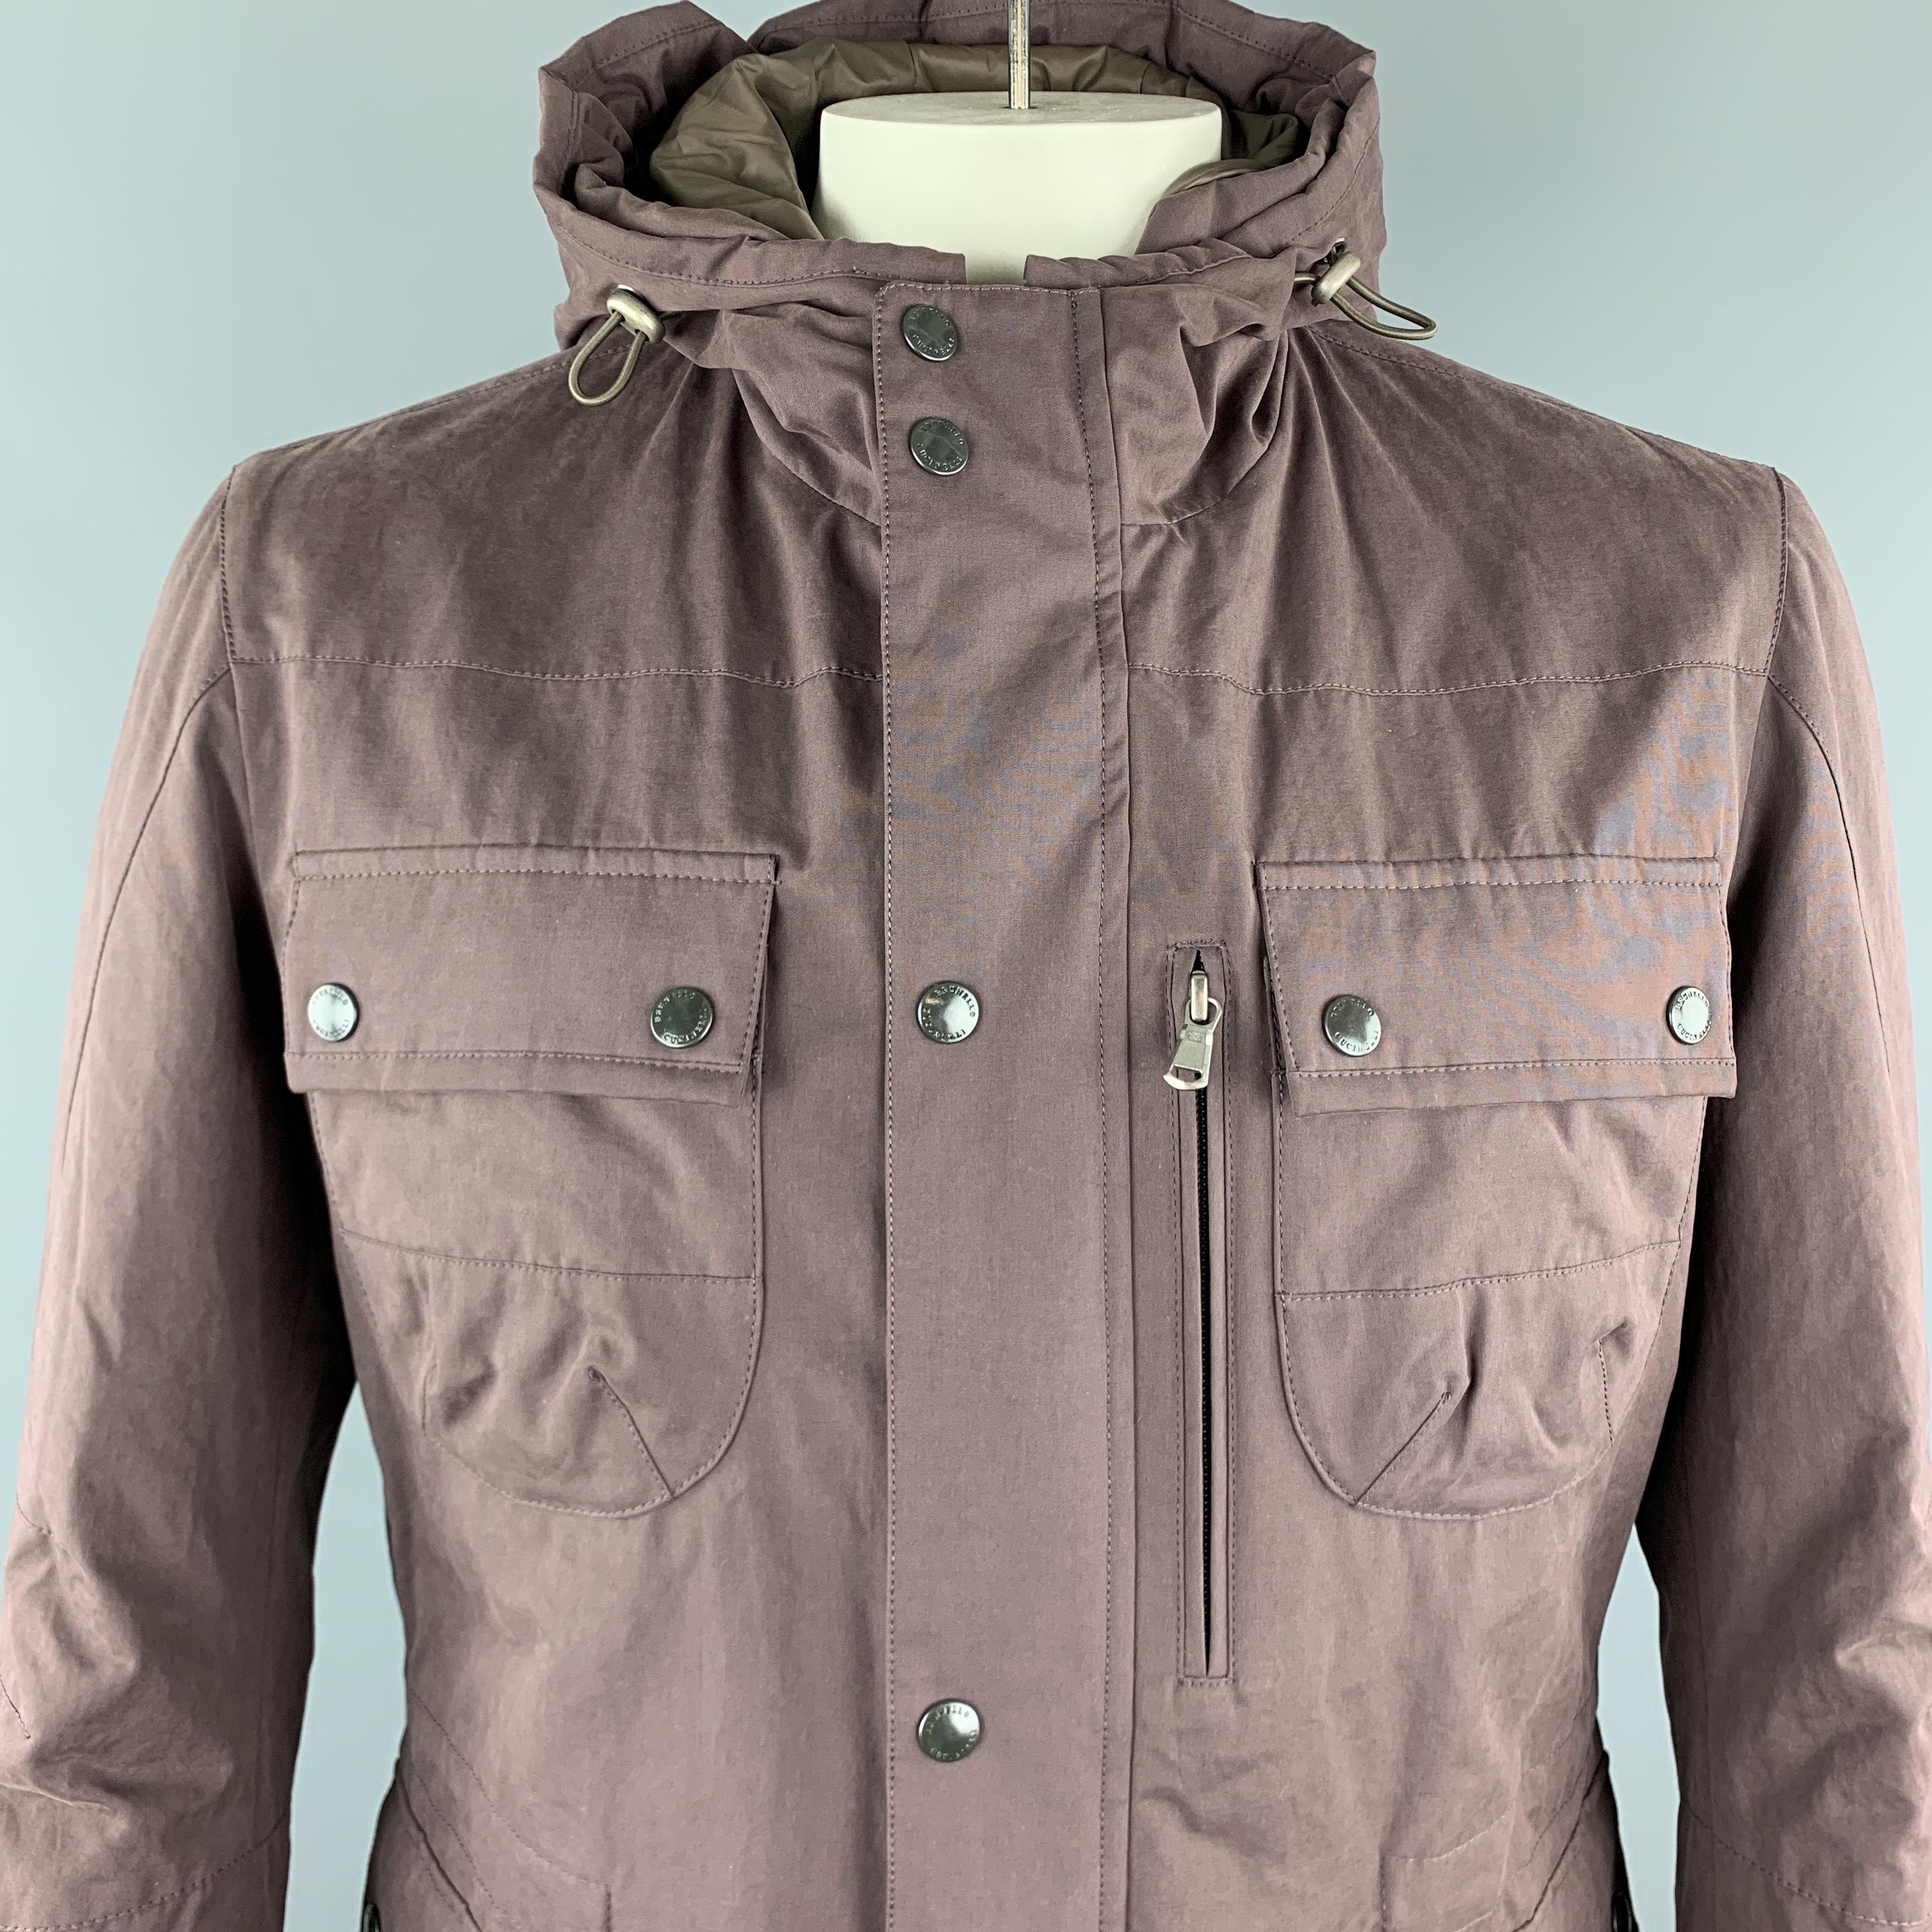 BRUNELLO CUCINELLI Jacket comes in a plum solid cotton blend material, with a hood, patch pockets, zip and snaps at closure, snaps at cuff, single breasted, with a quilted lining. Made in Italy.

New with Tags.
Marked: L

Original Retail Price: